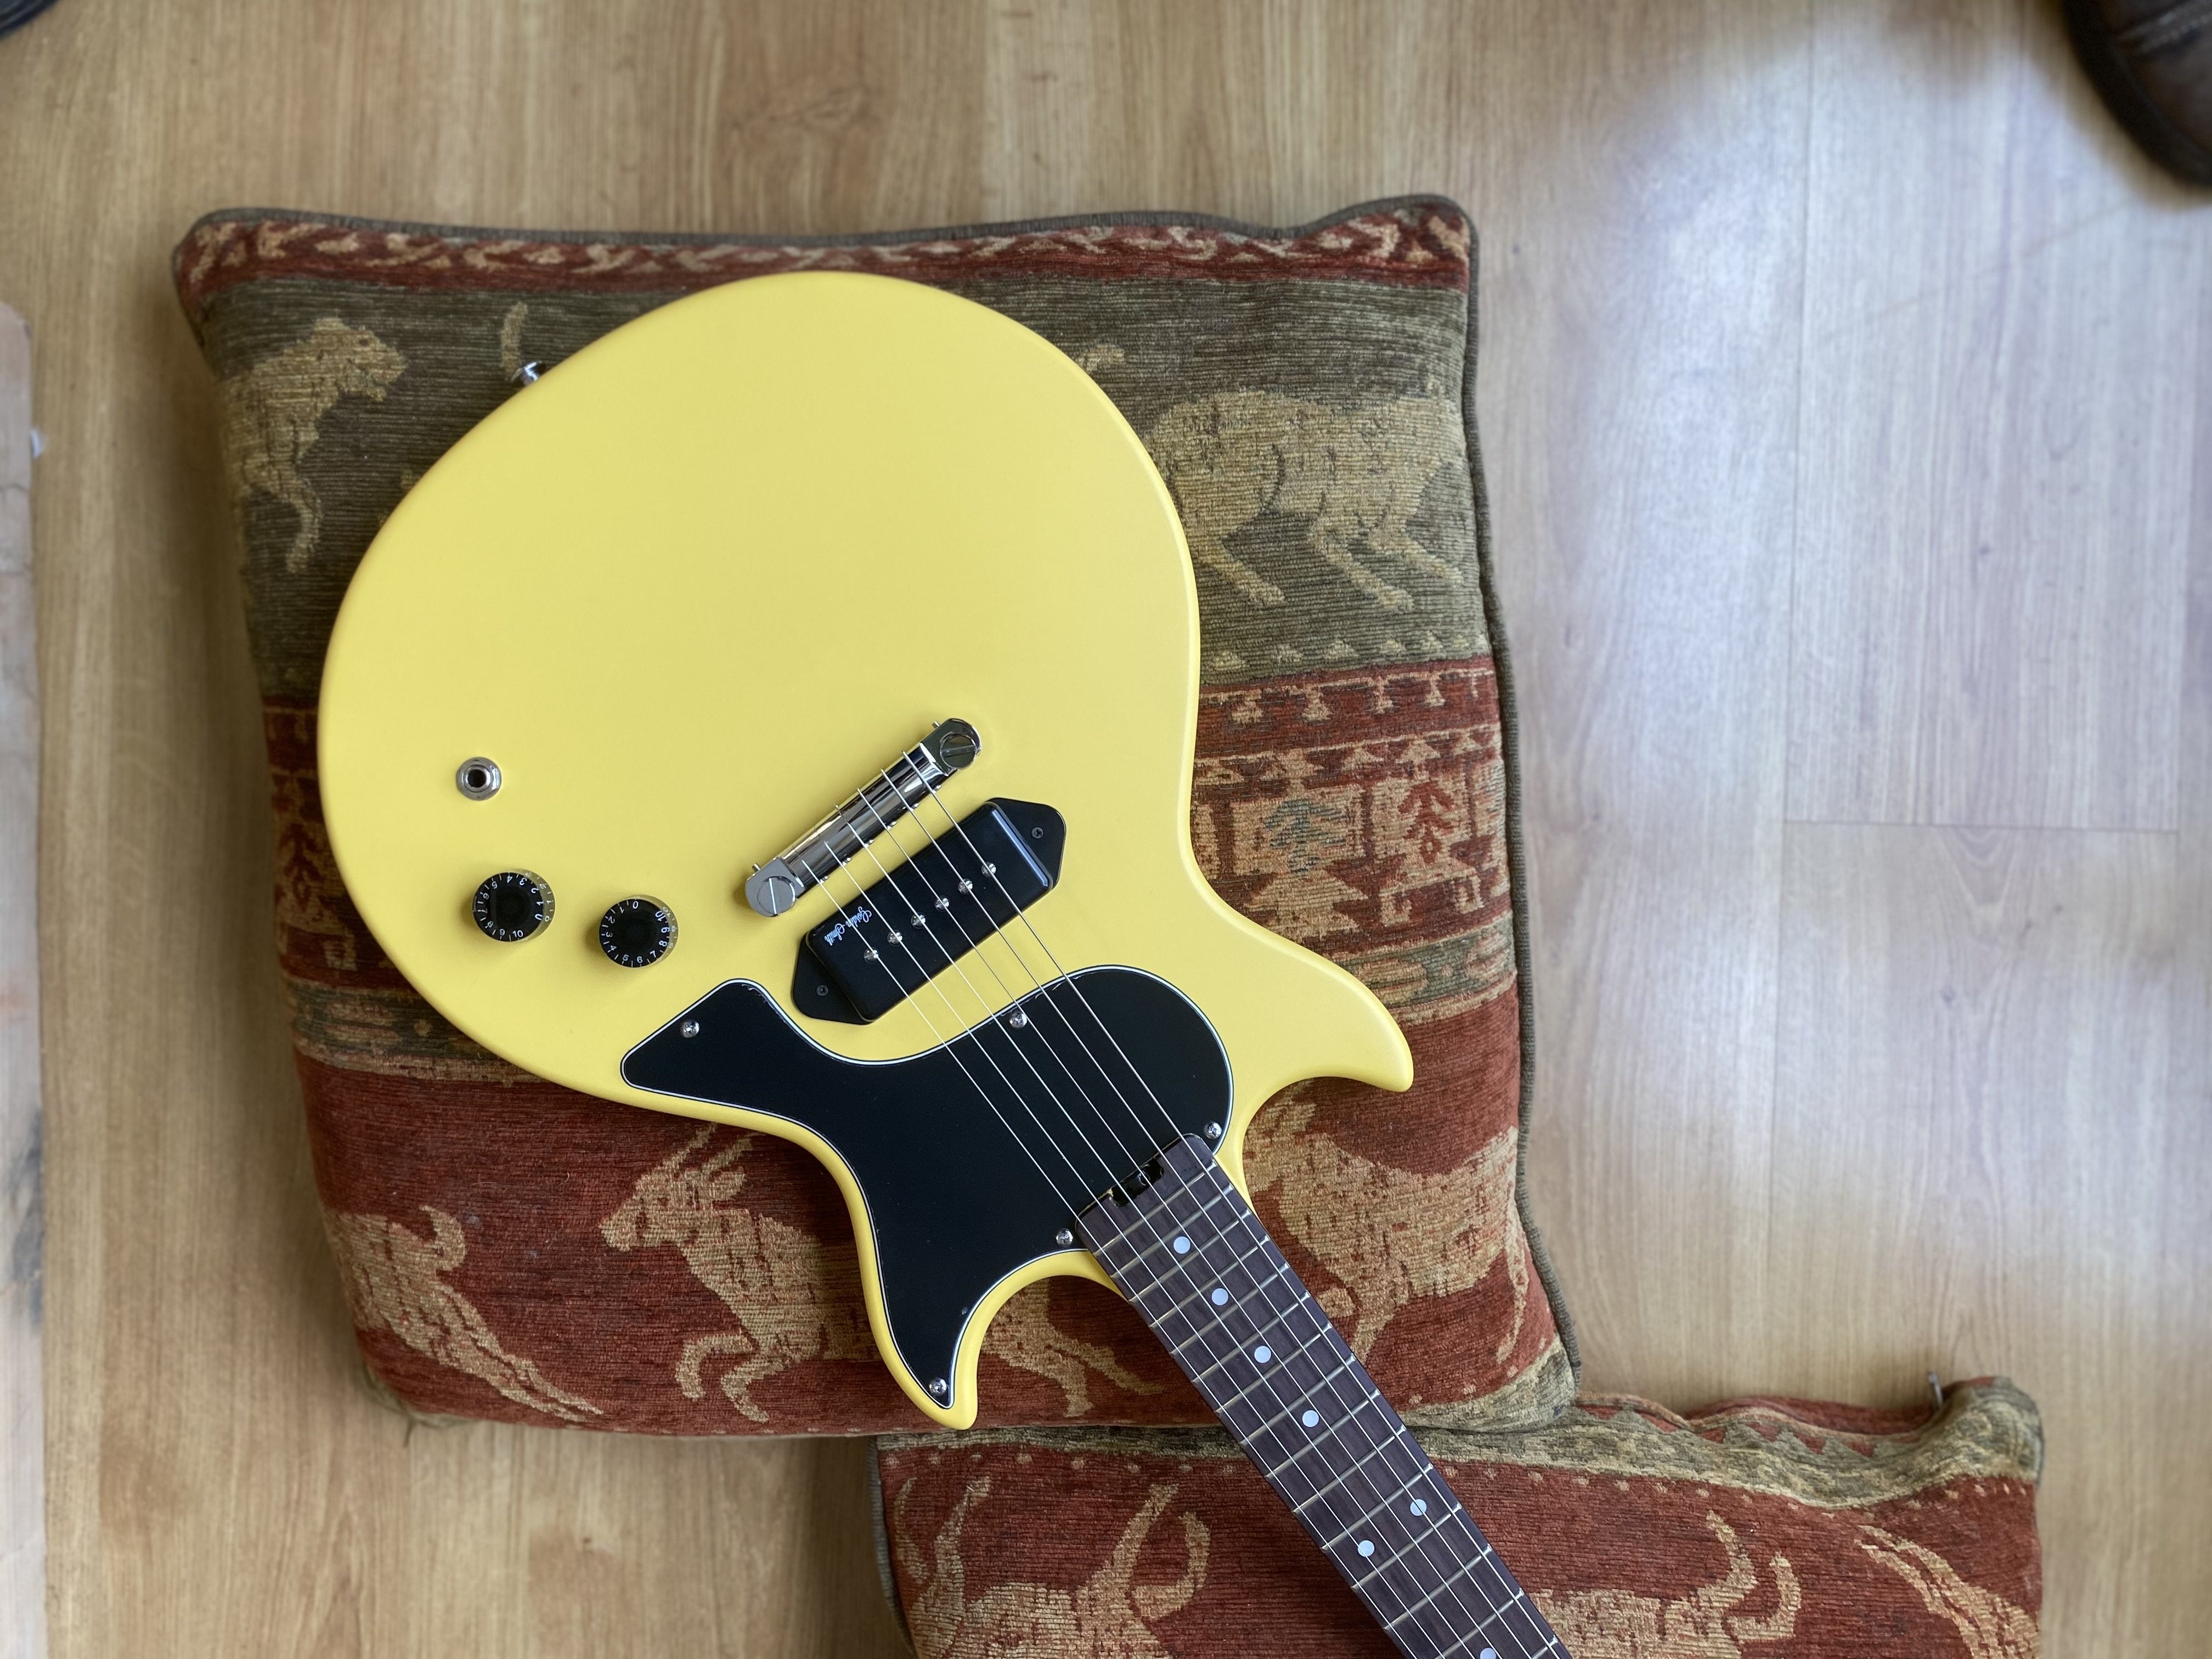 Gordon Smith GS1 P90 Thick Body TV Yellow, Electric Guitar for sale at Richards Guitars.